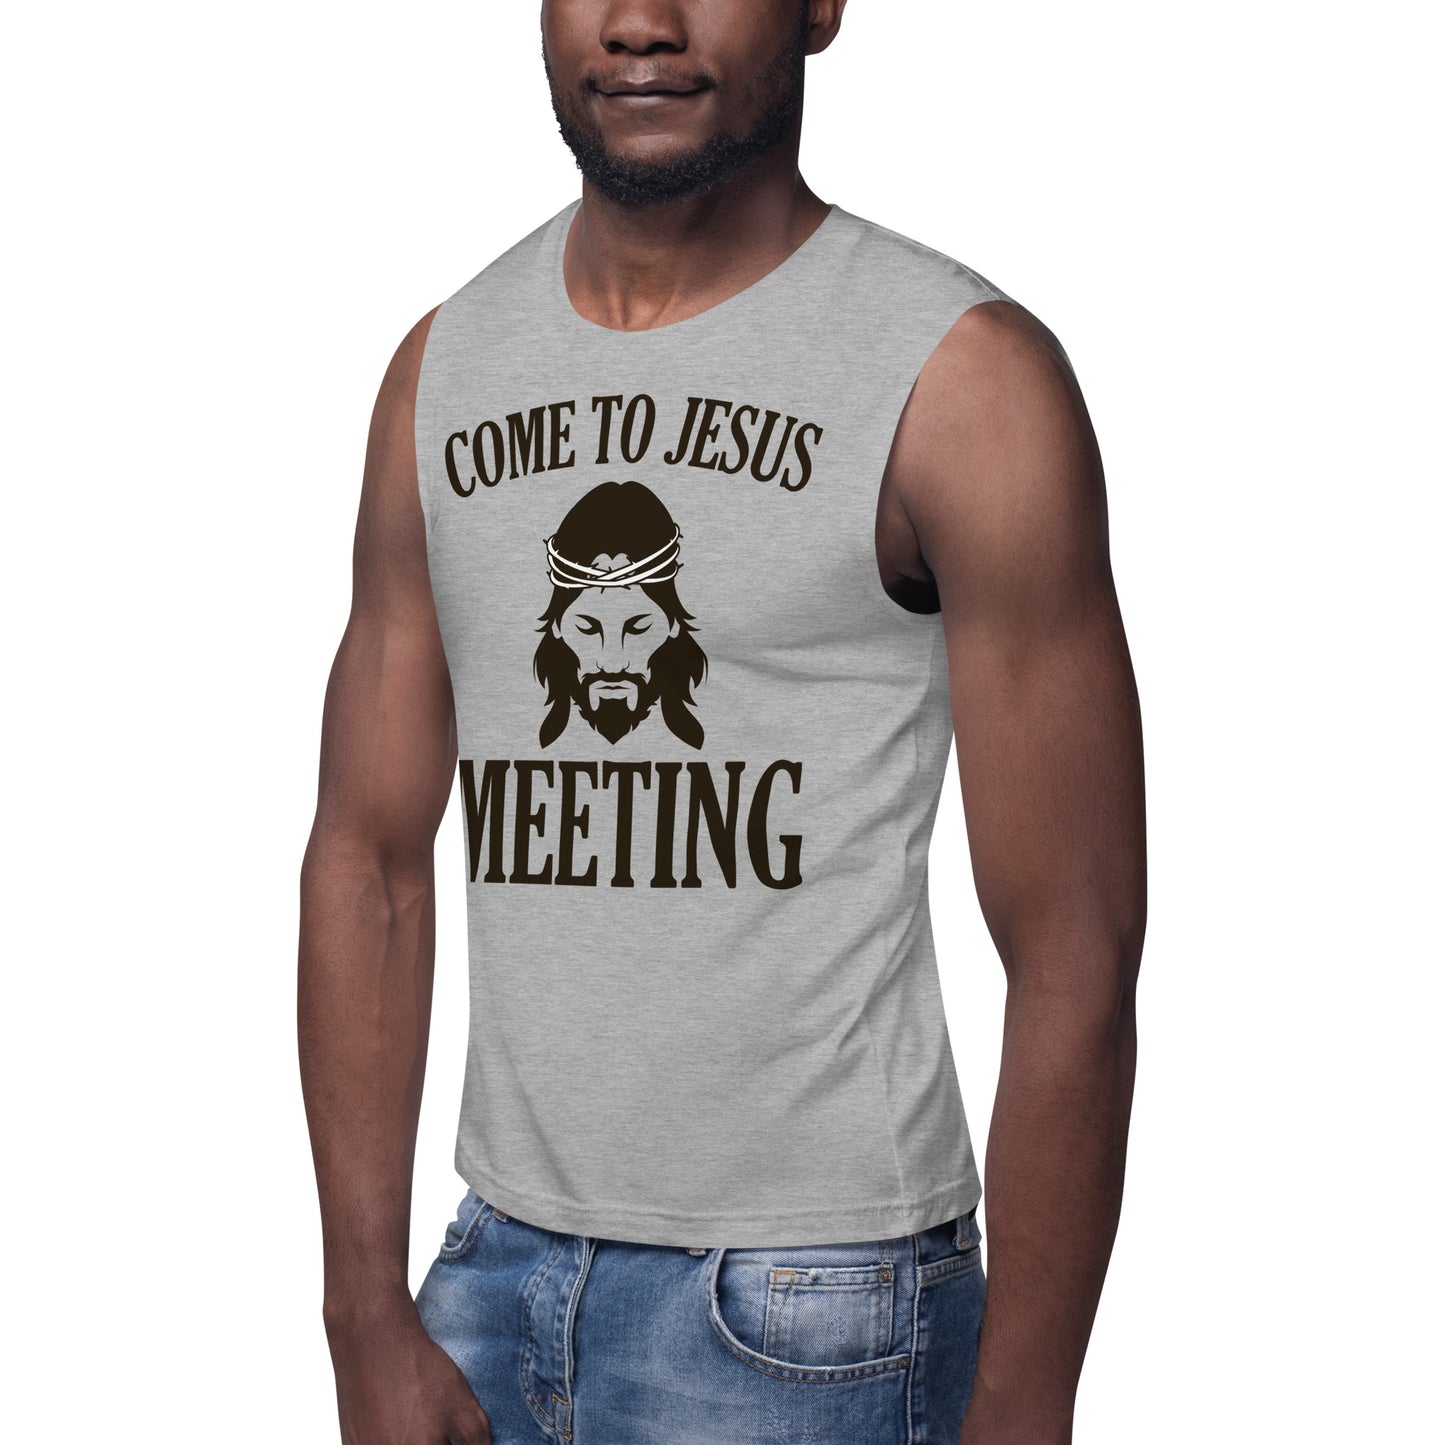 Come to Jesus Meeting / Unisex Muscle Shirt